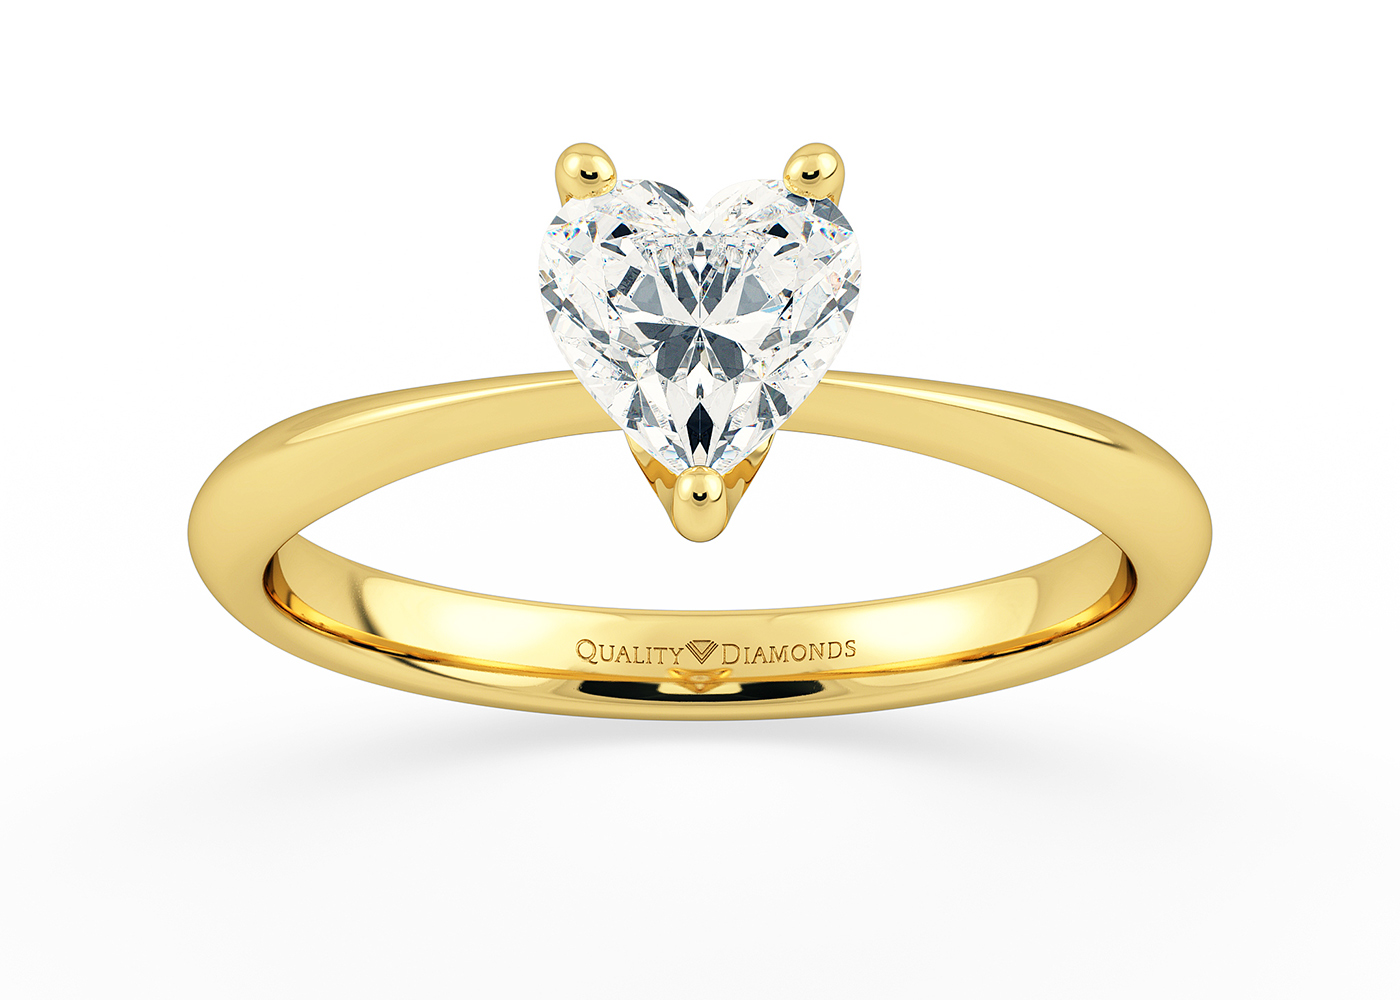 One Carat Heart Solitaire Diamond Engagement Ring in 18K Yellow Gold